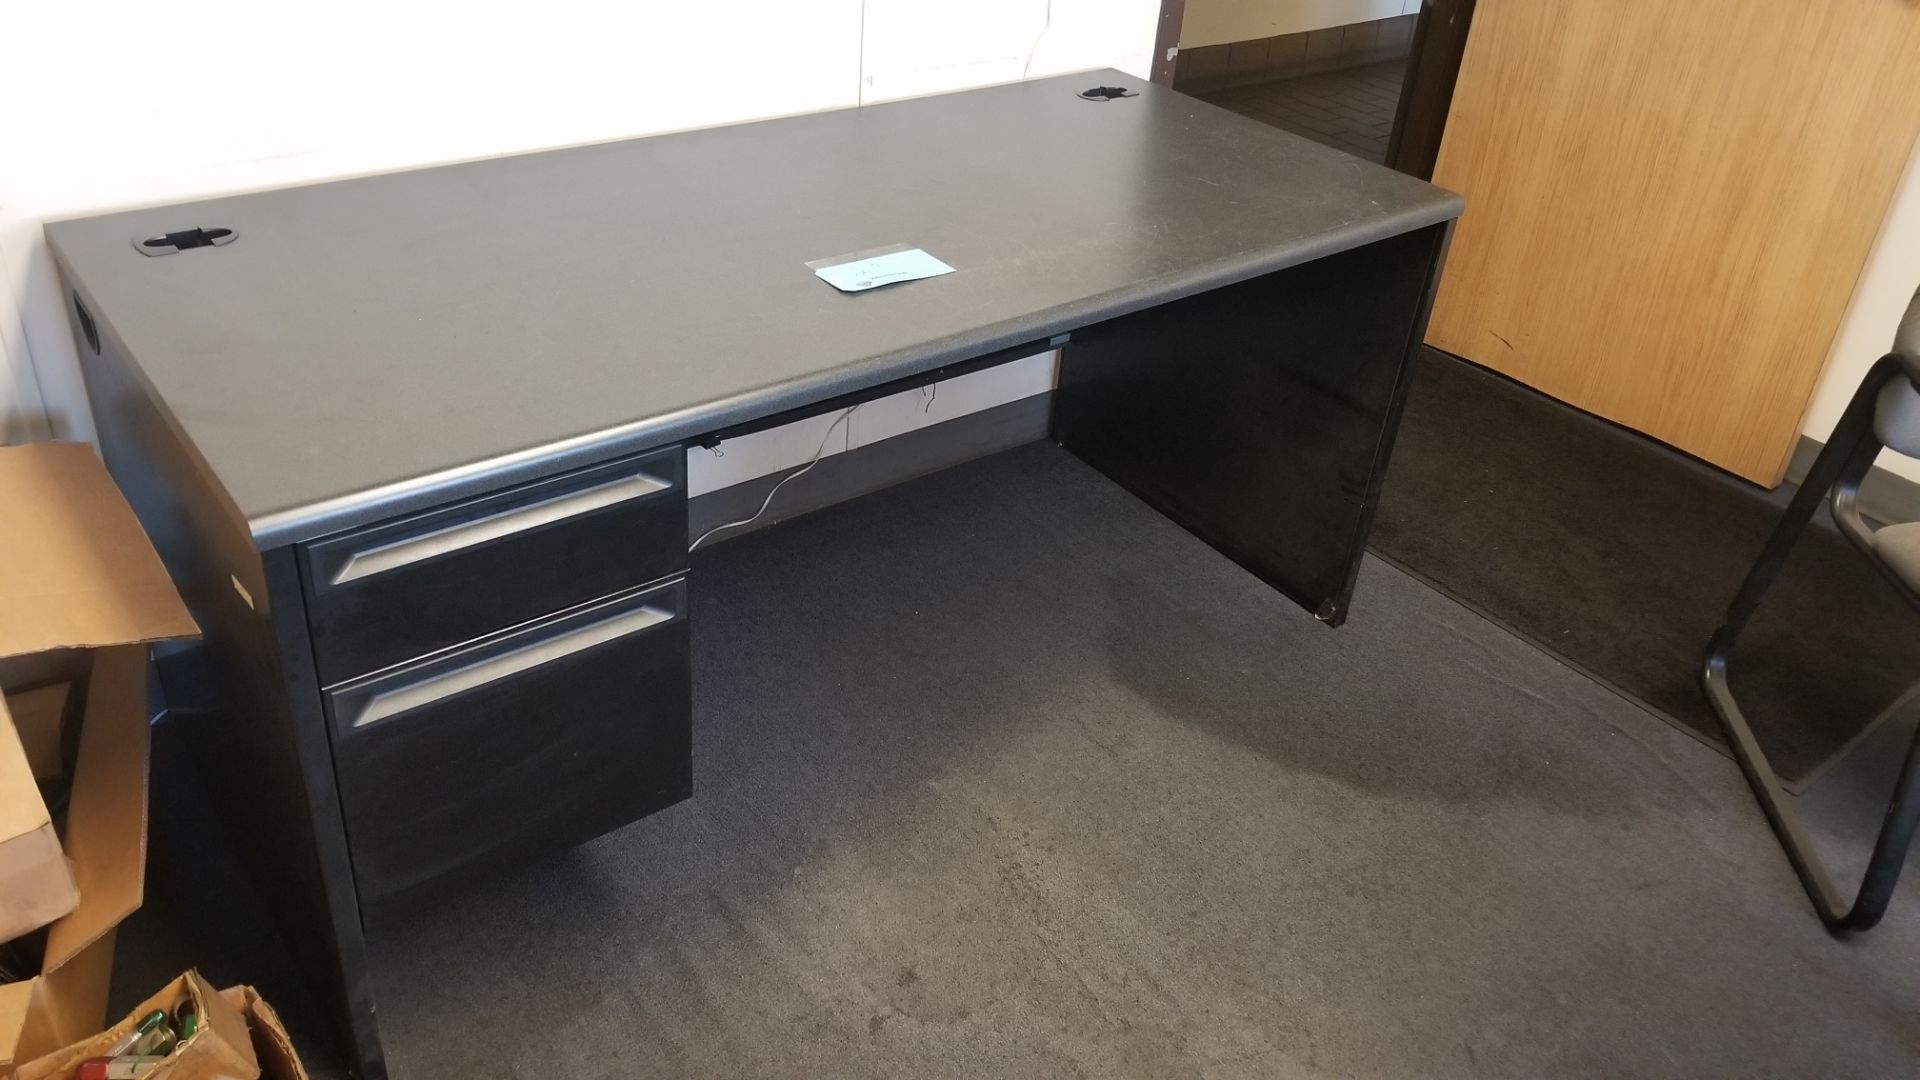 66” x 30” Desk: 2 Drawer with Grey Top - Image 2 of 2